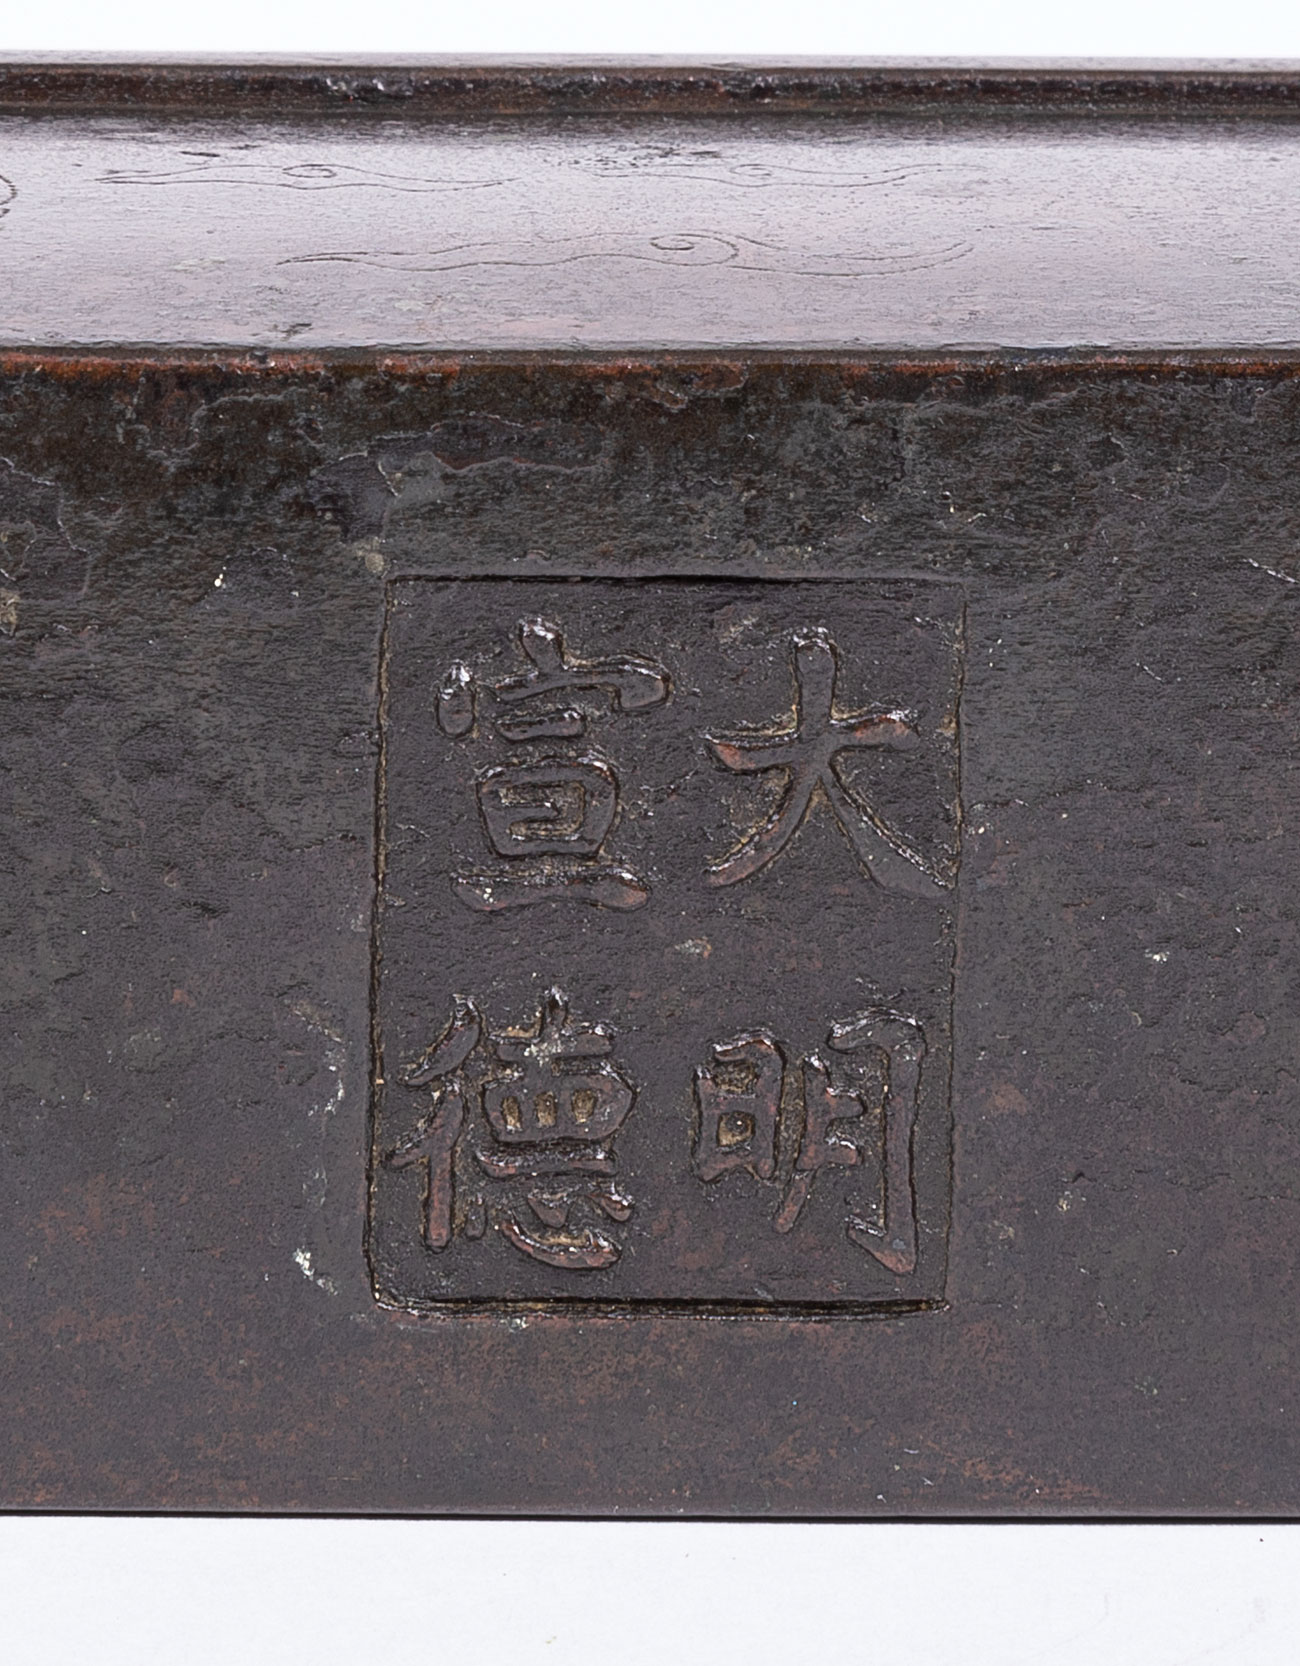 Chinese Bronze Covered Box , Qing Dynasty (1644-1911) or earlier, possibly a censer or incense - Image 3 of 3